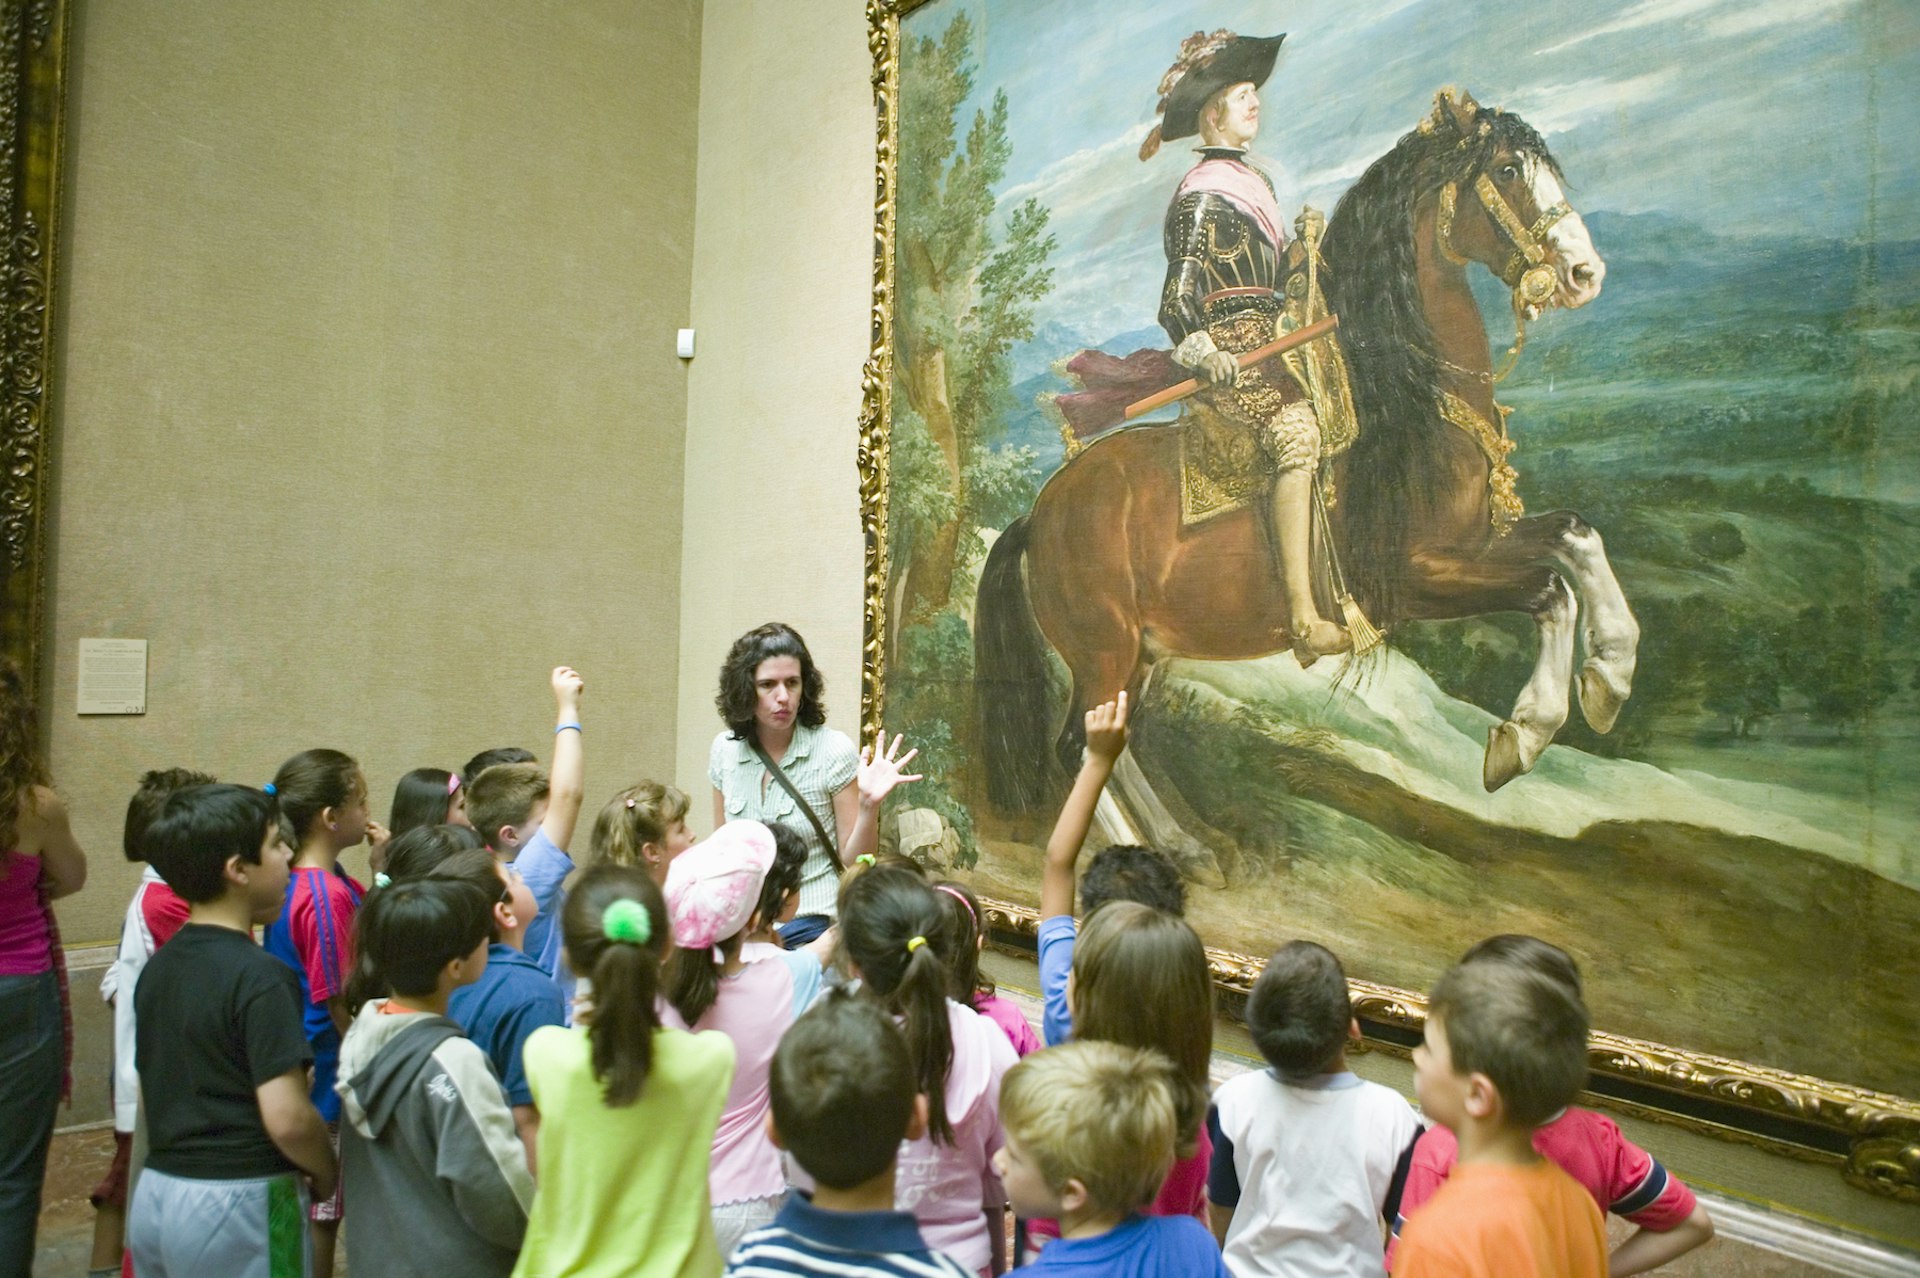 An educator interacts with children in from of "Philip IV on Horseback" by Diego Velázquez at the Museo del Prado, Madrid Spain